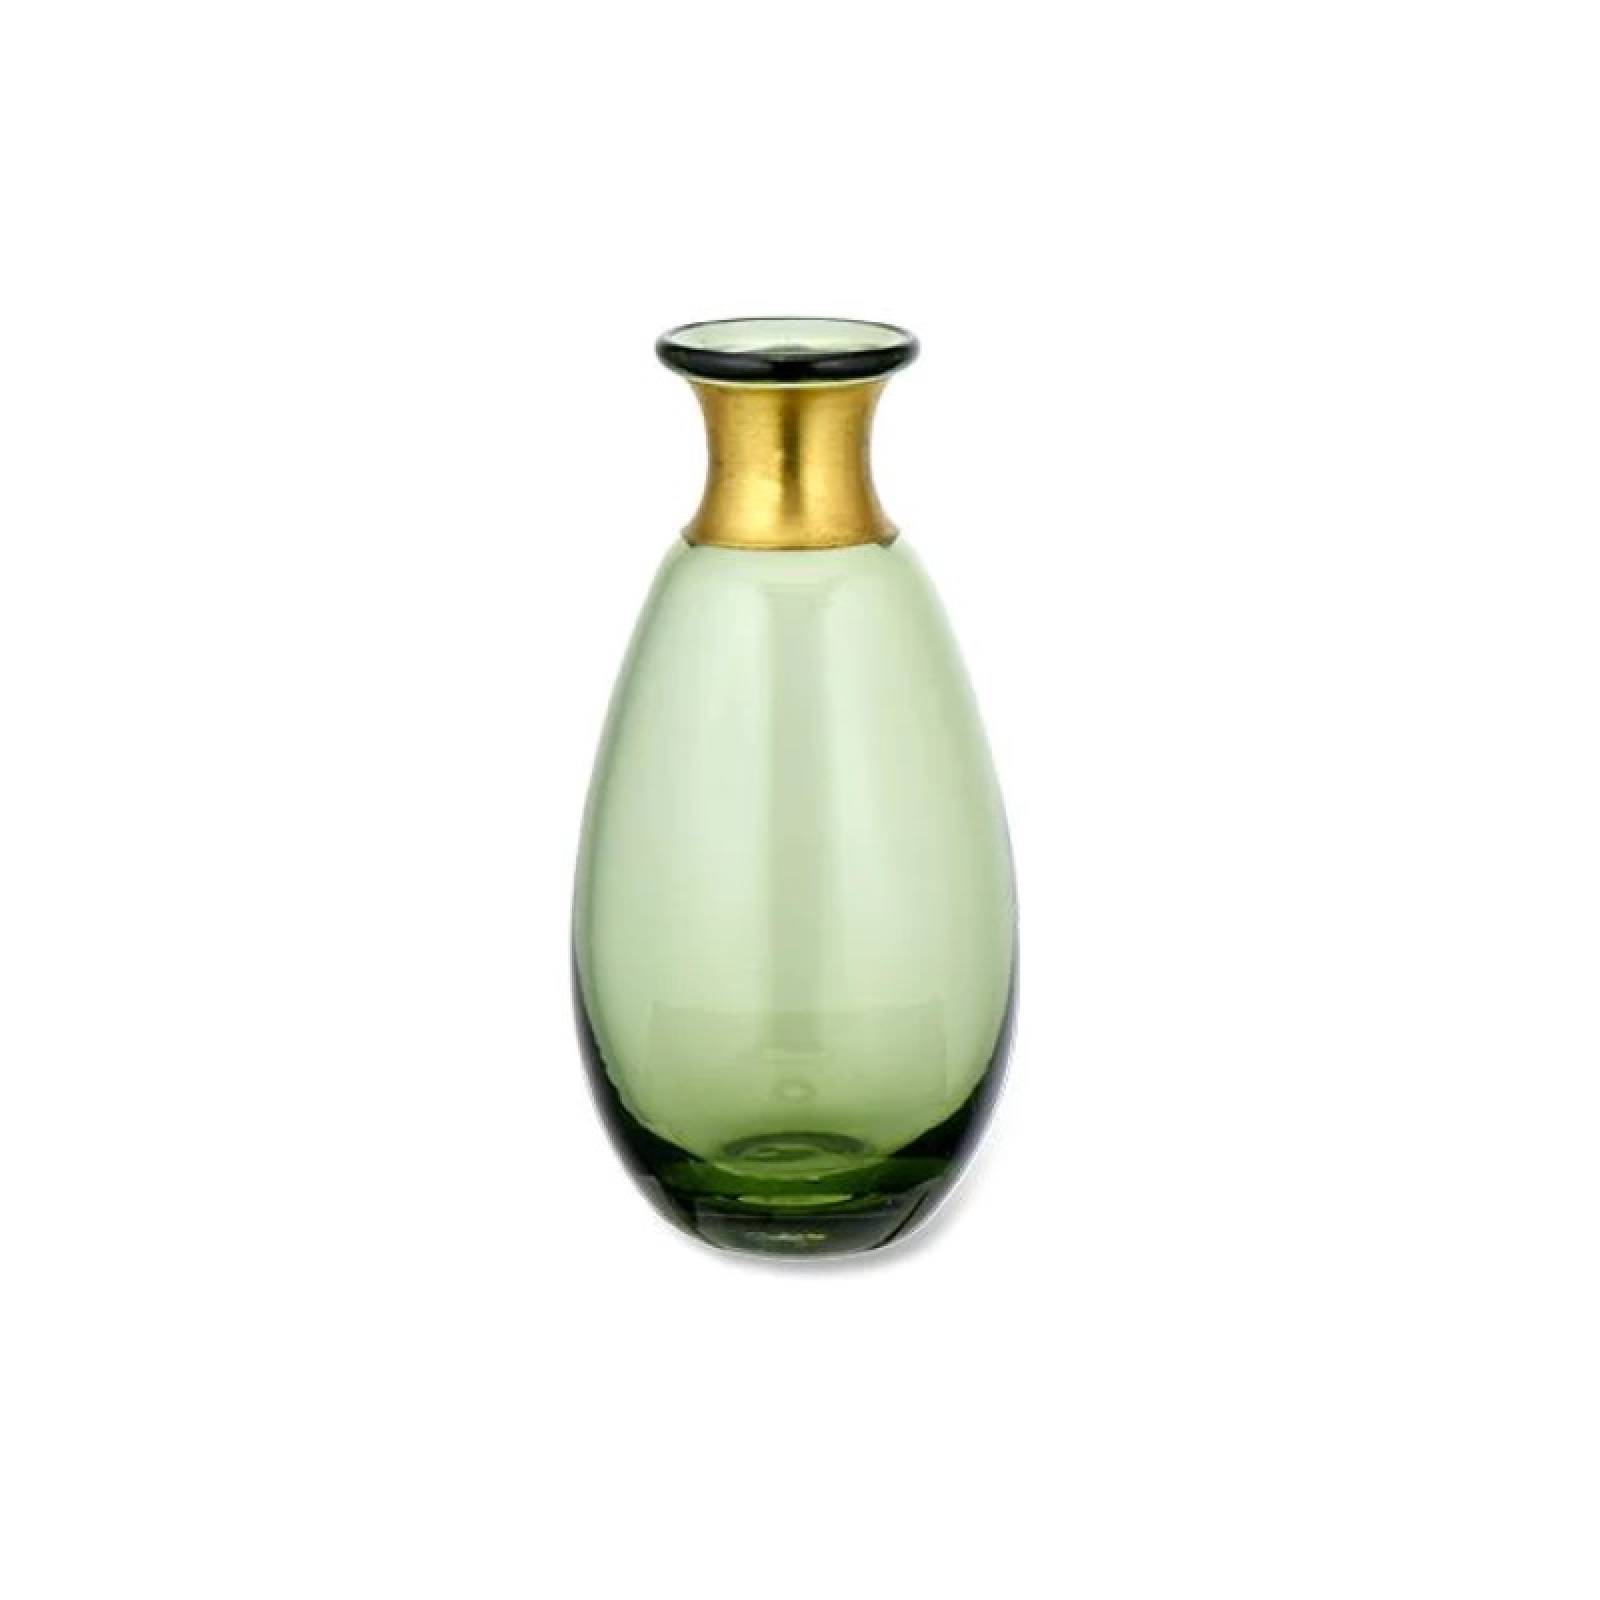 Large Green Glass Vase With Brass Band 16.5x8cm